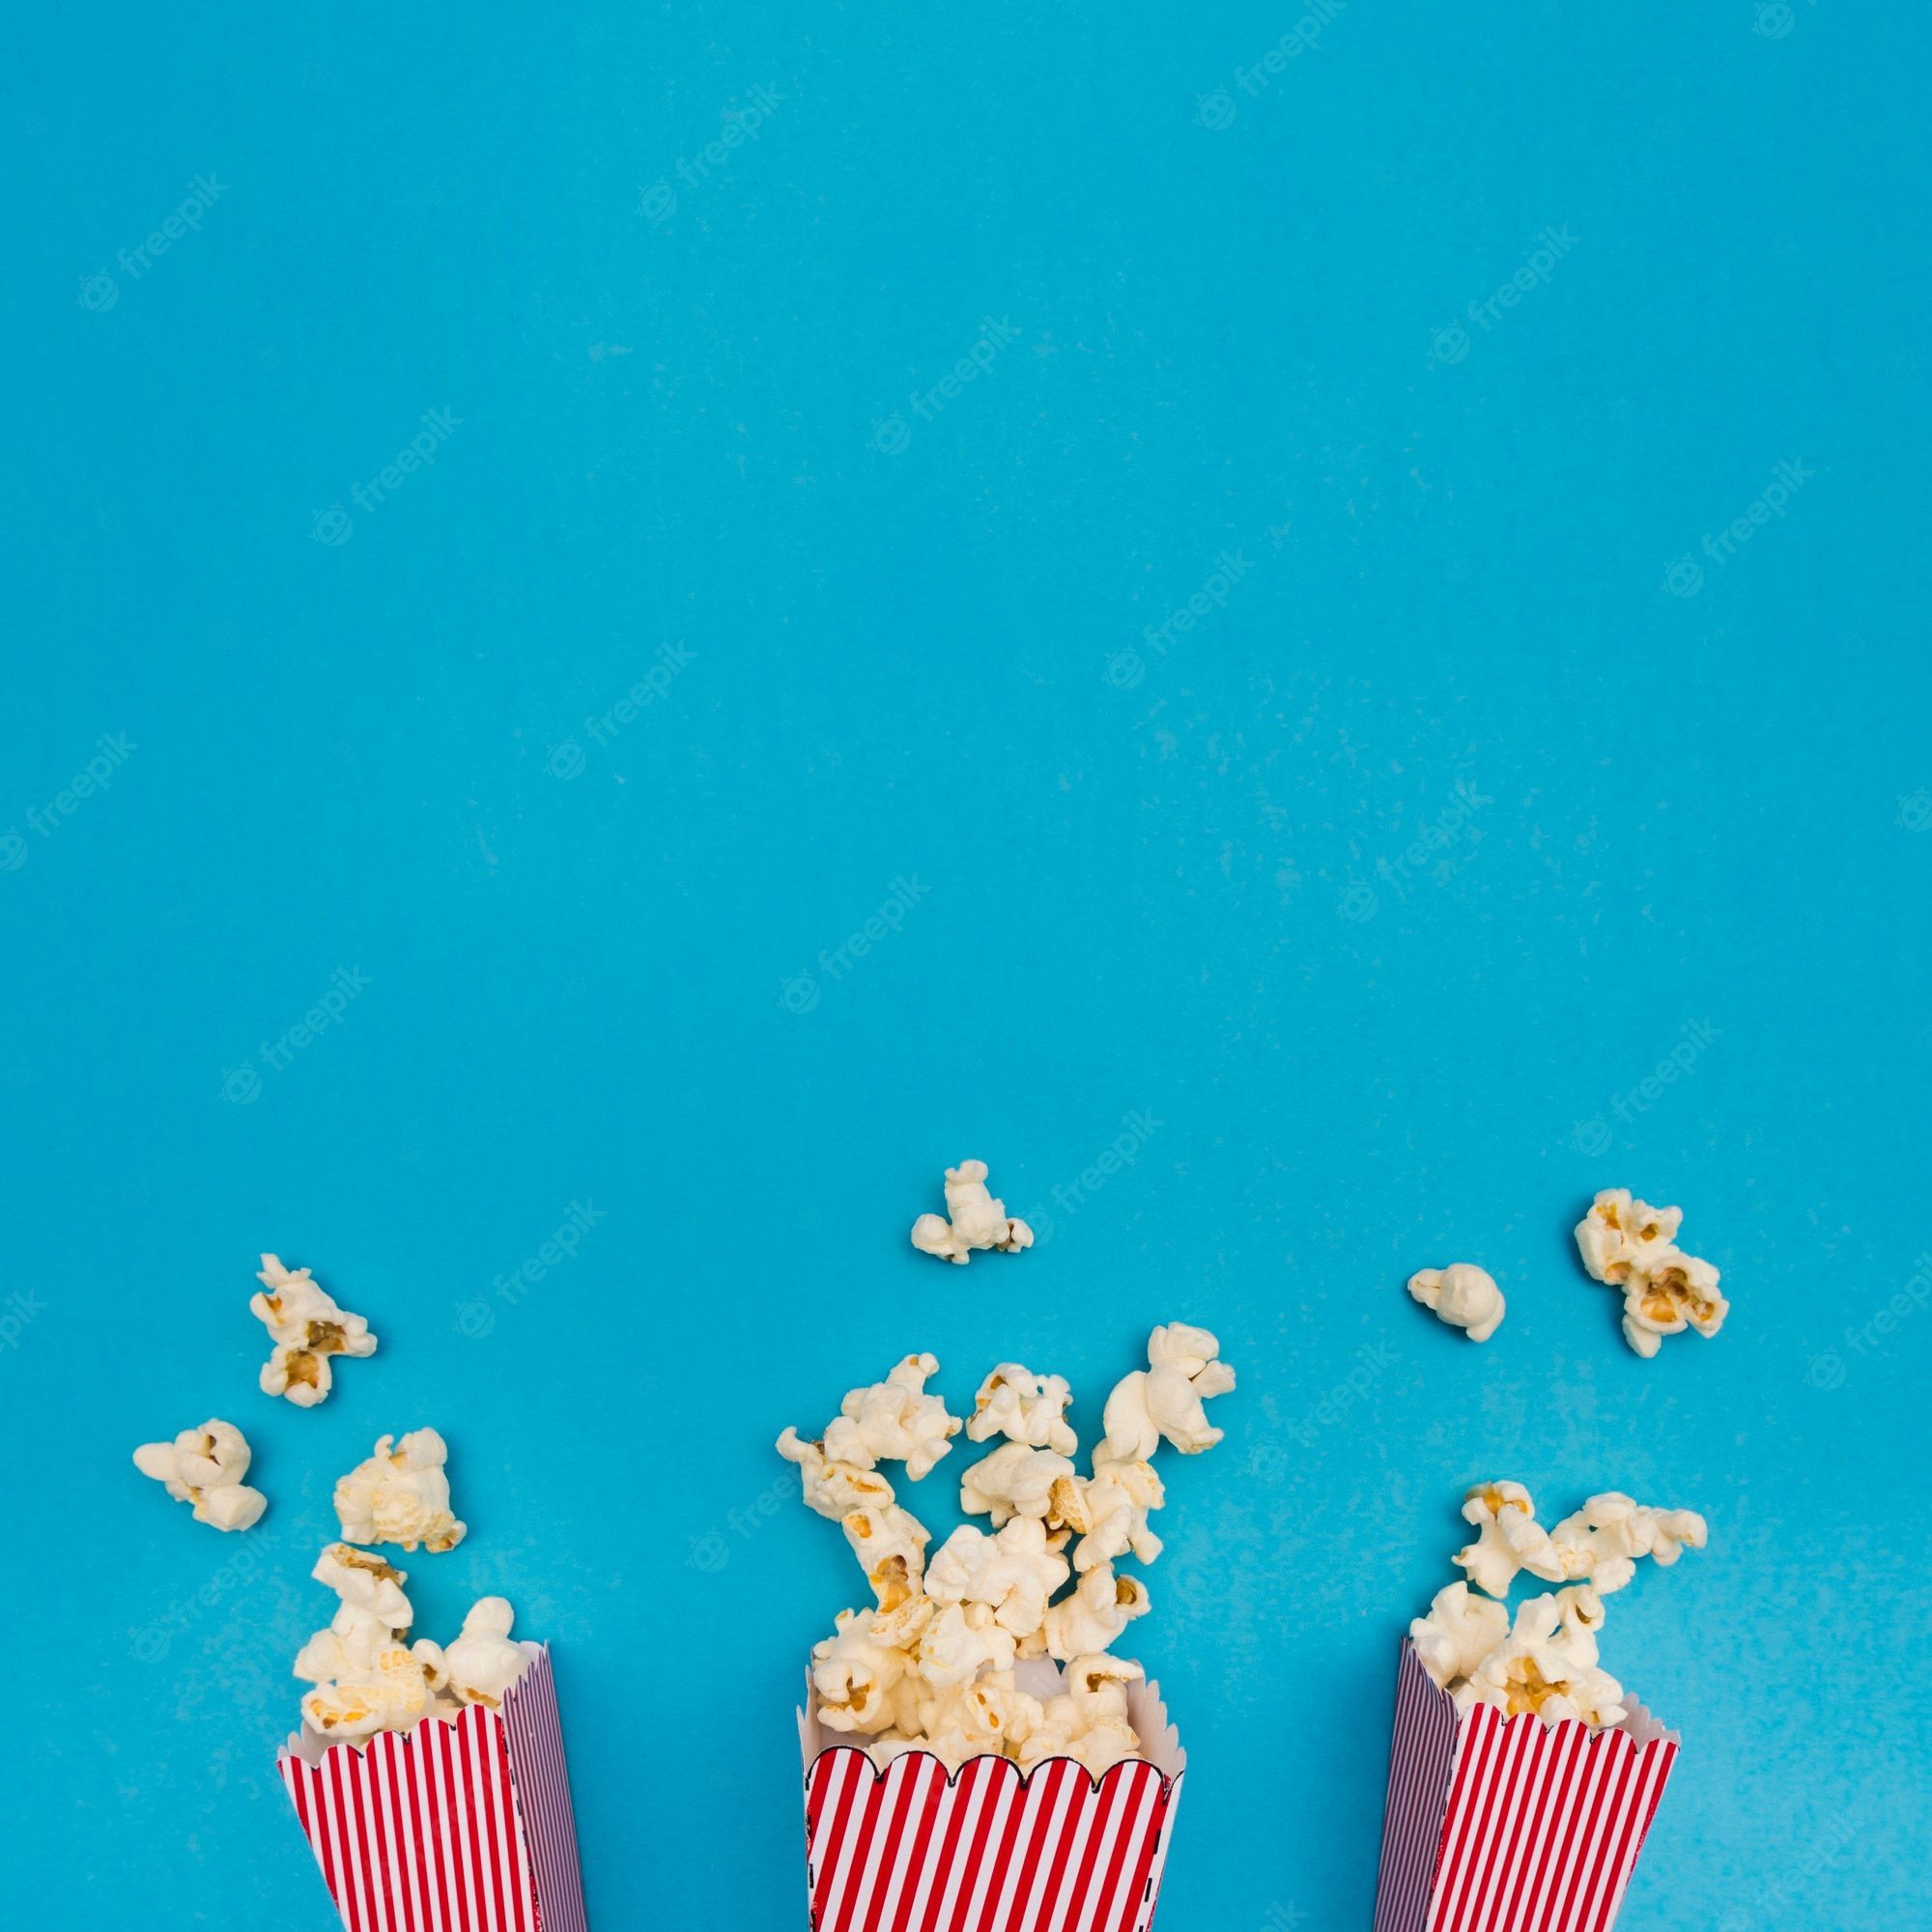 Popcorn in red and white striped buckets on a blue background - Popcorn